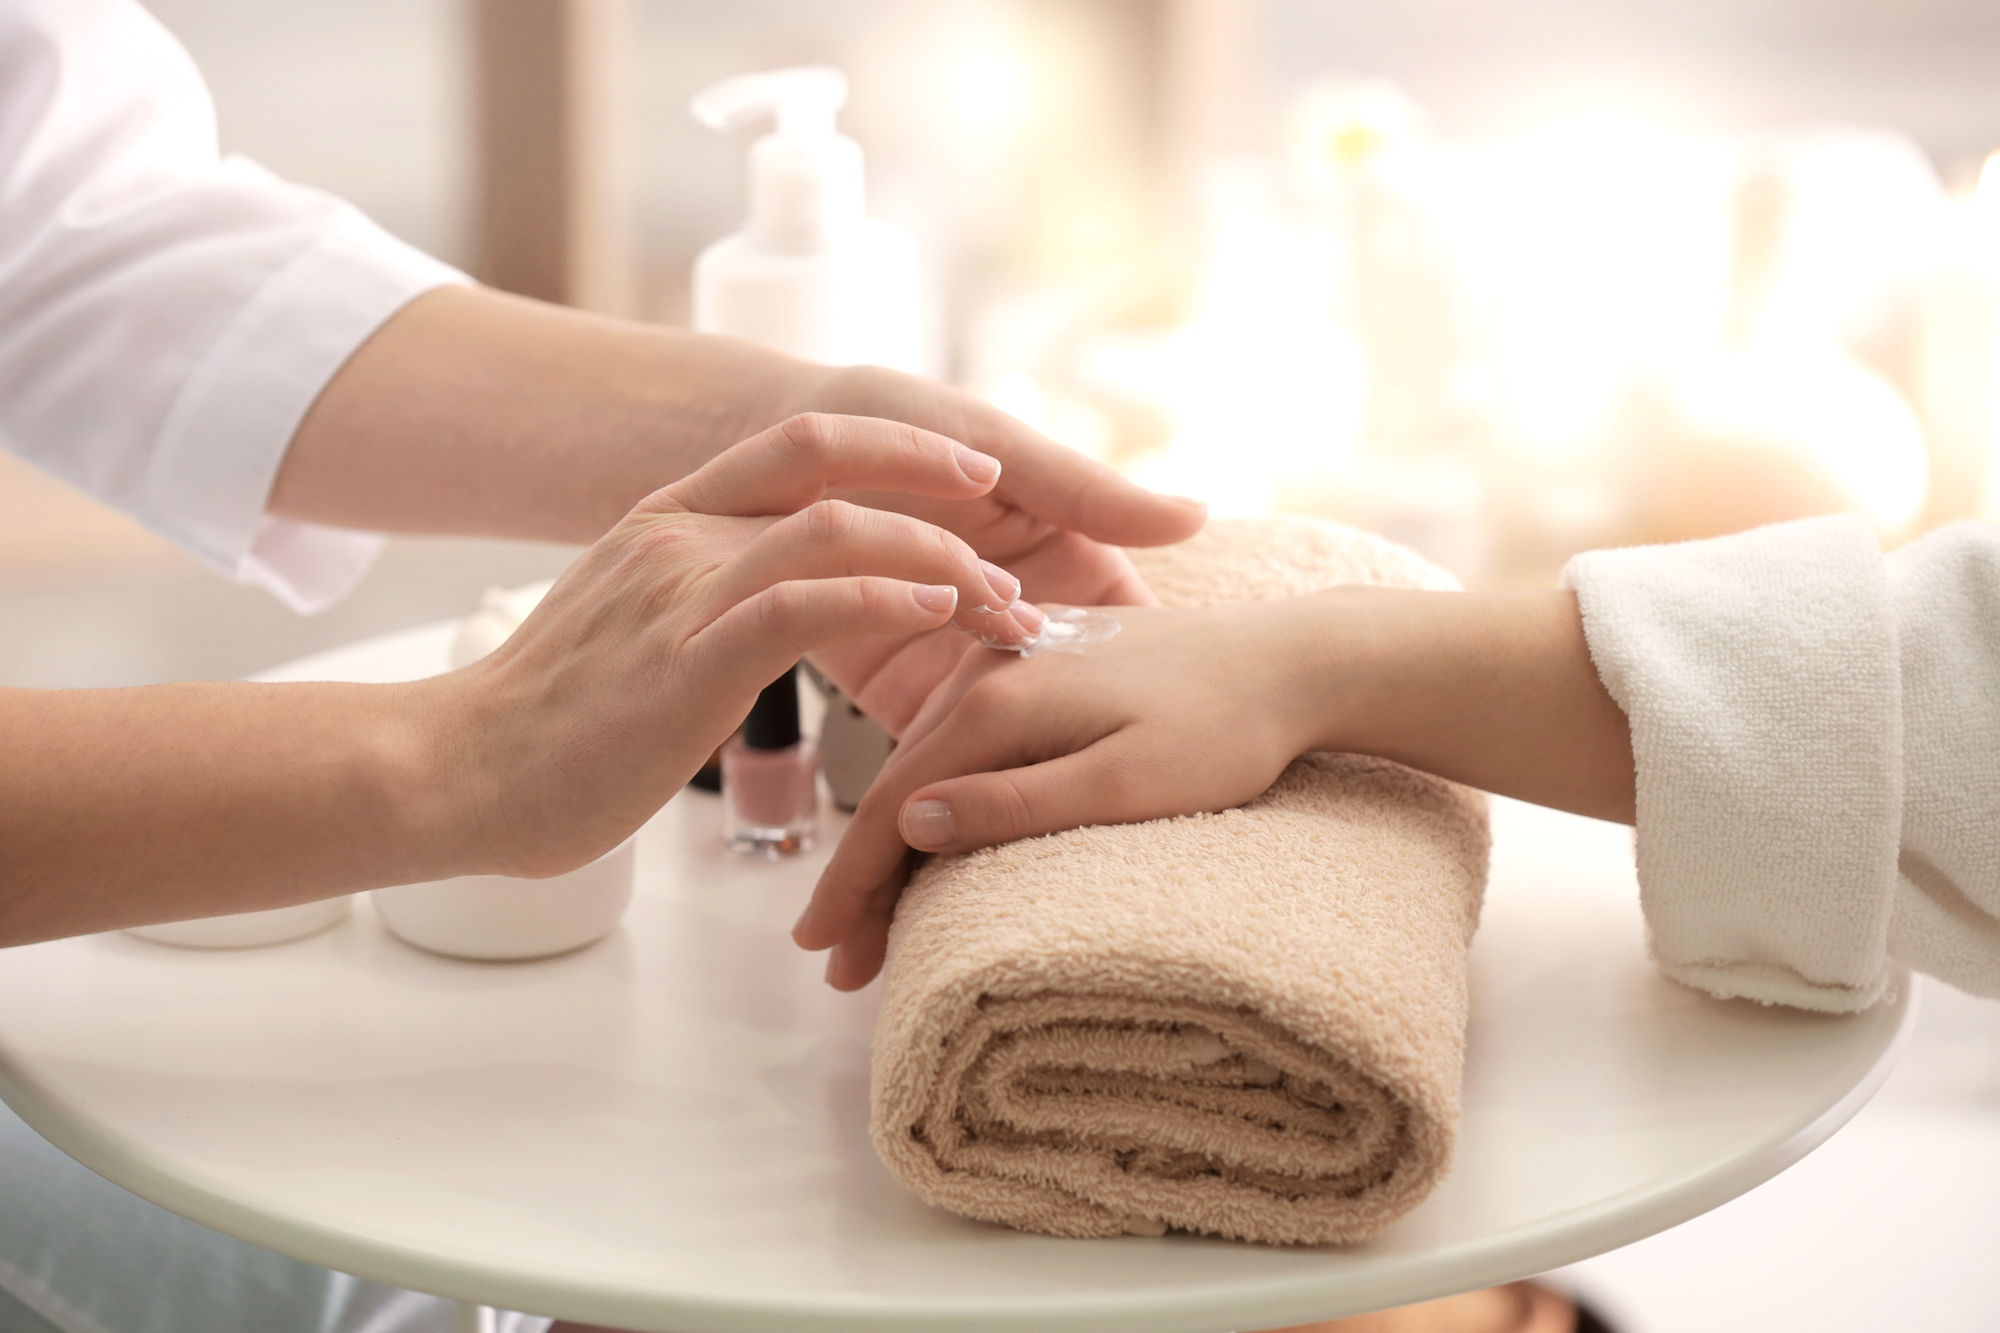 Services | A Polished Work | Chicago Nail Salon